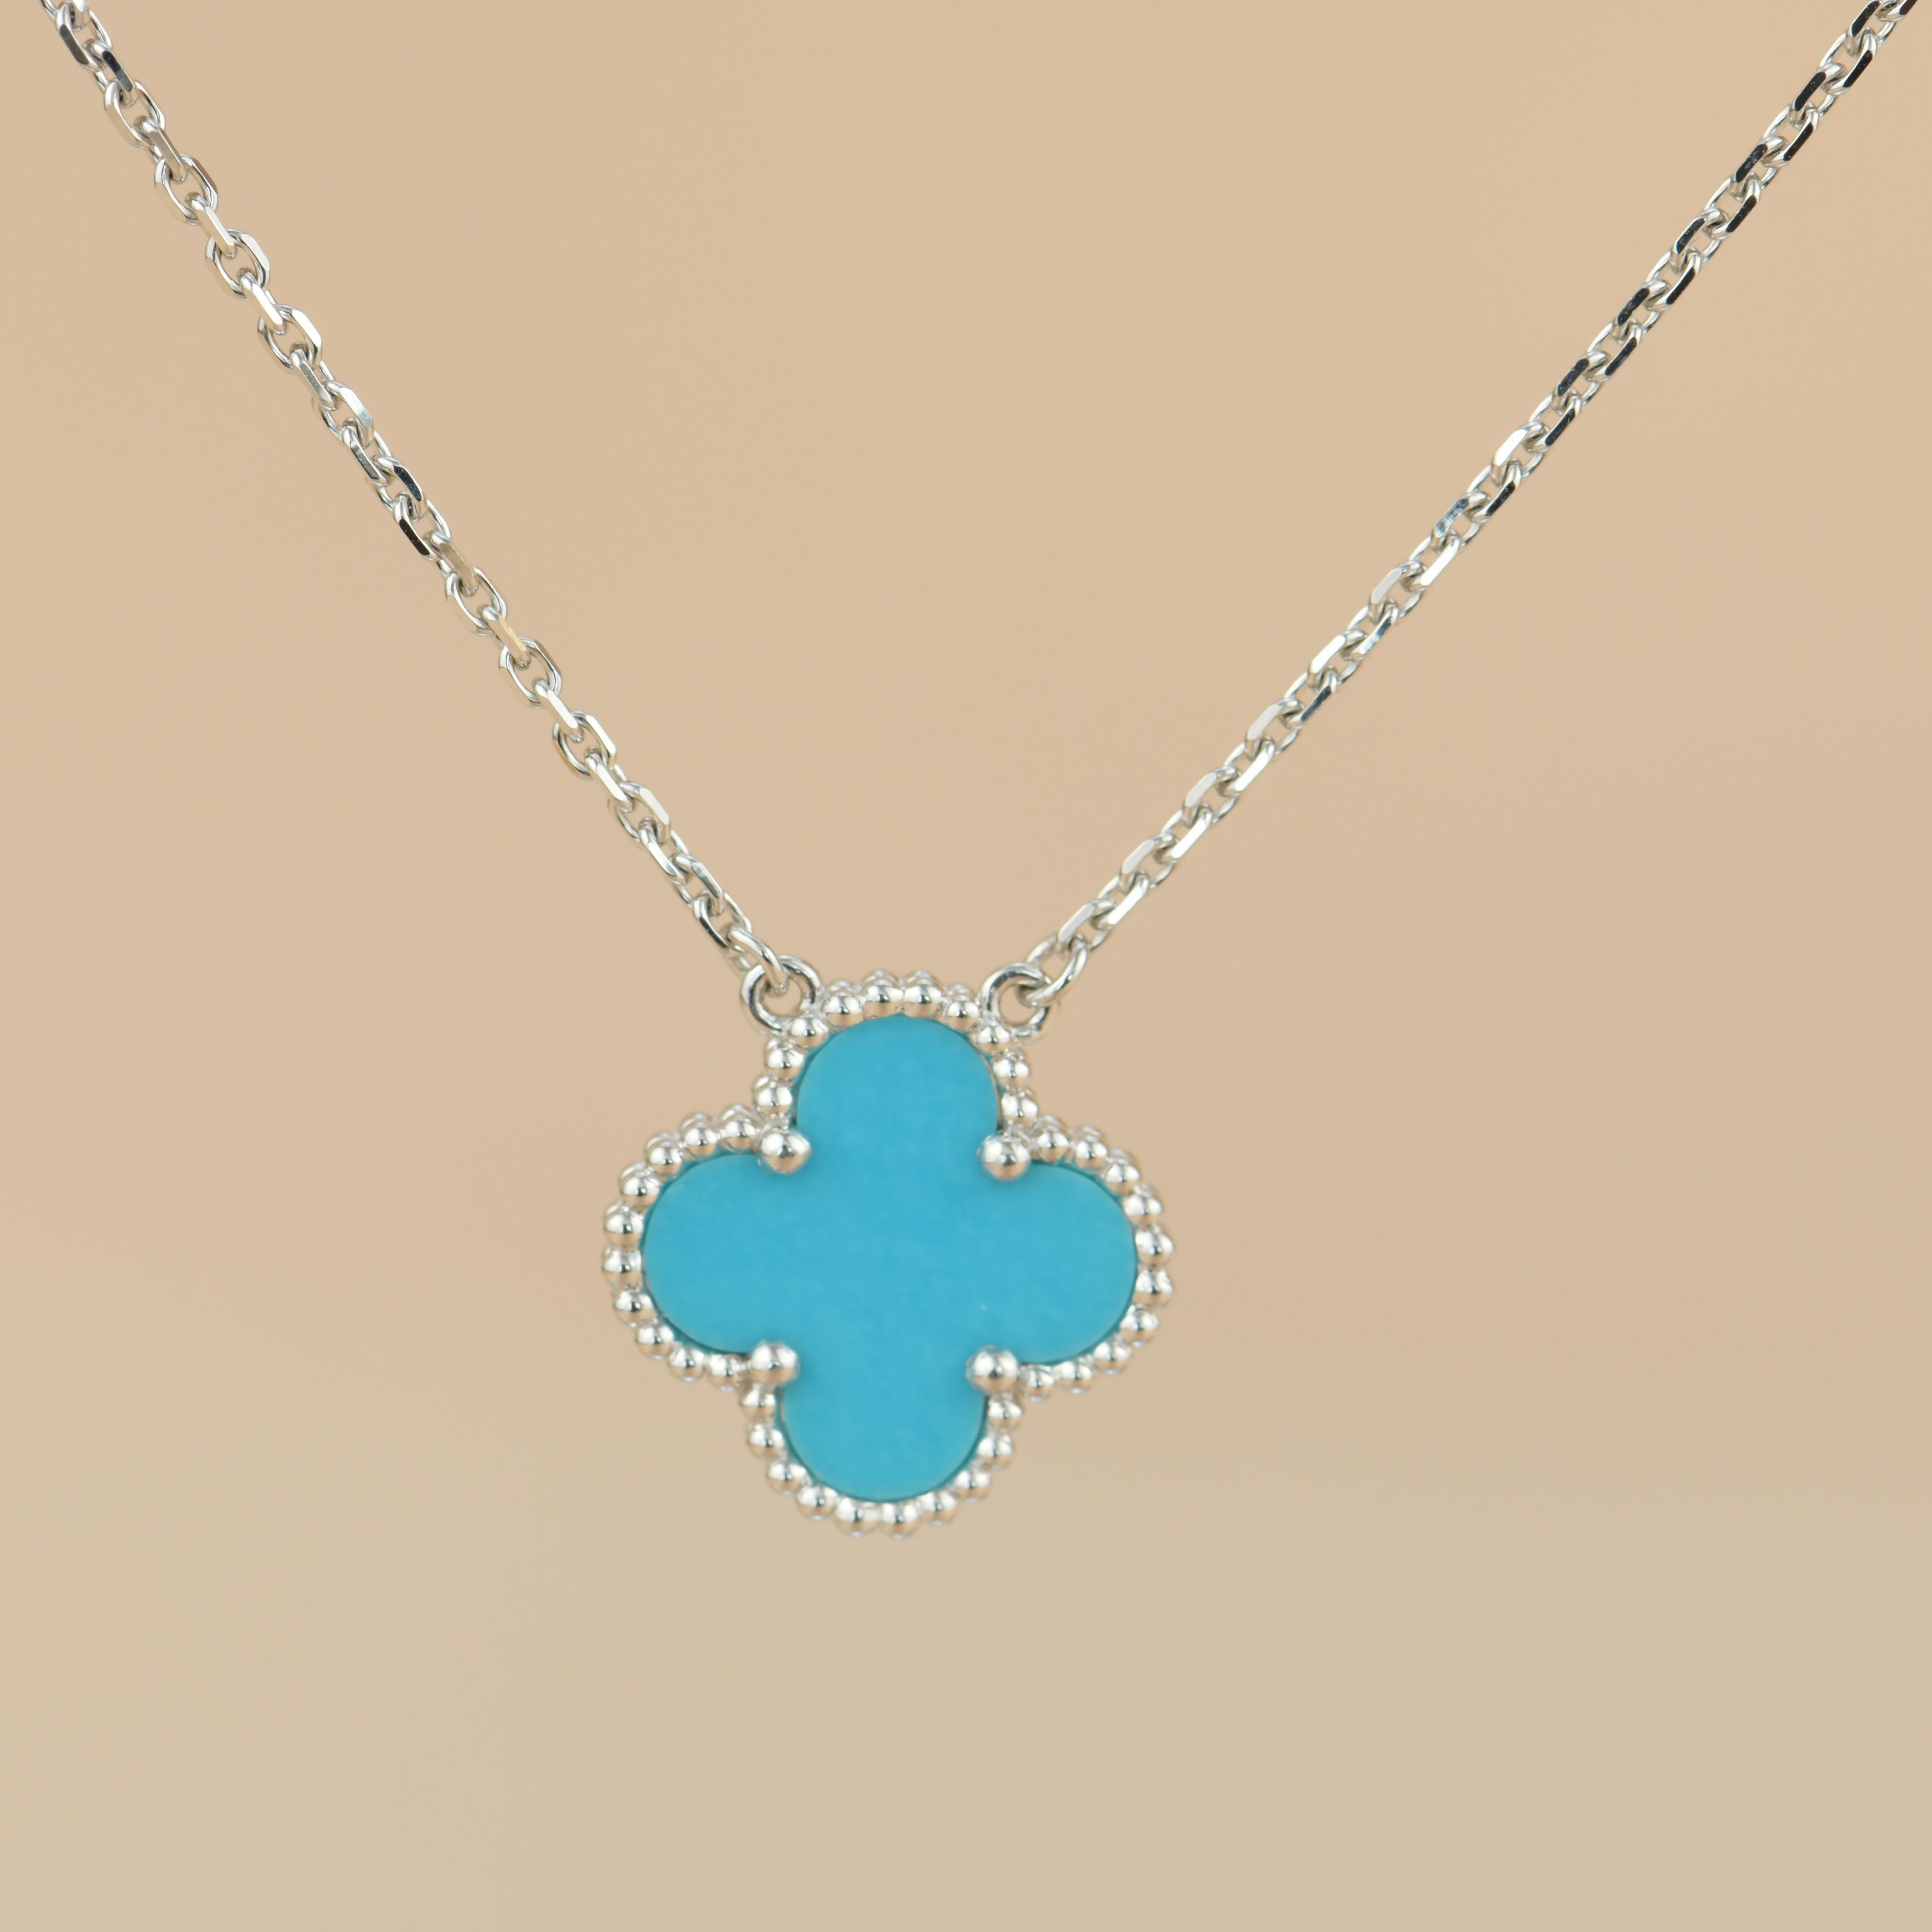 Van Cleef & Arpels turquoise Alhambra is a very rare piece, especially this medium size of the turquoise Alhambra which you won't find it comes to the market very often because VCA has already stopped producing turquoise medium size anymore. This is